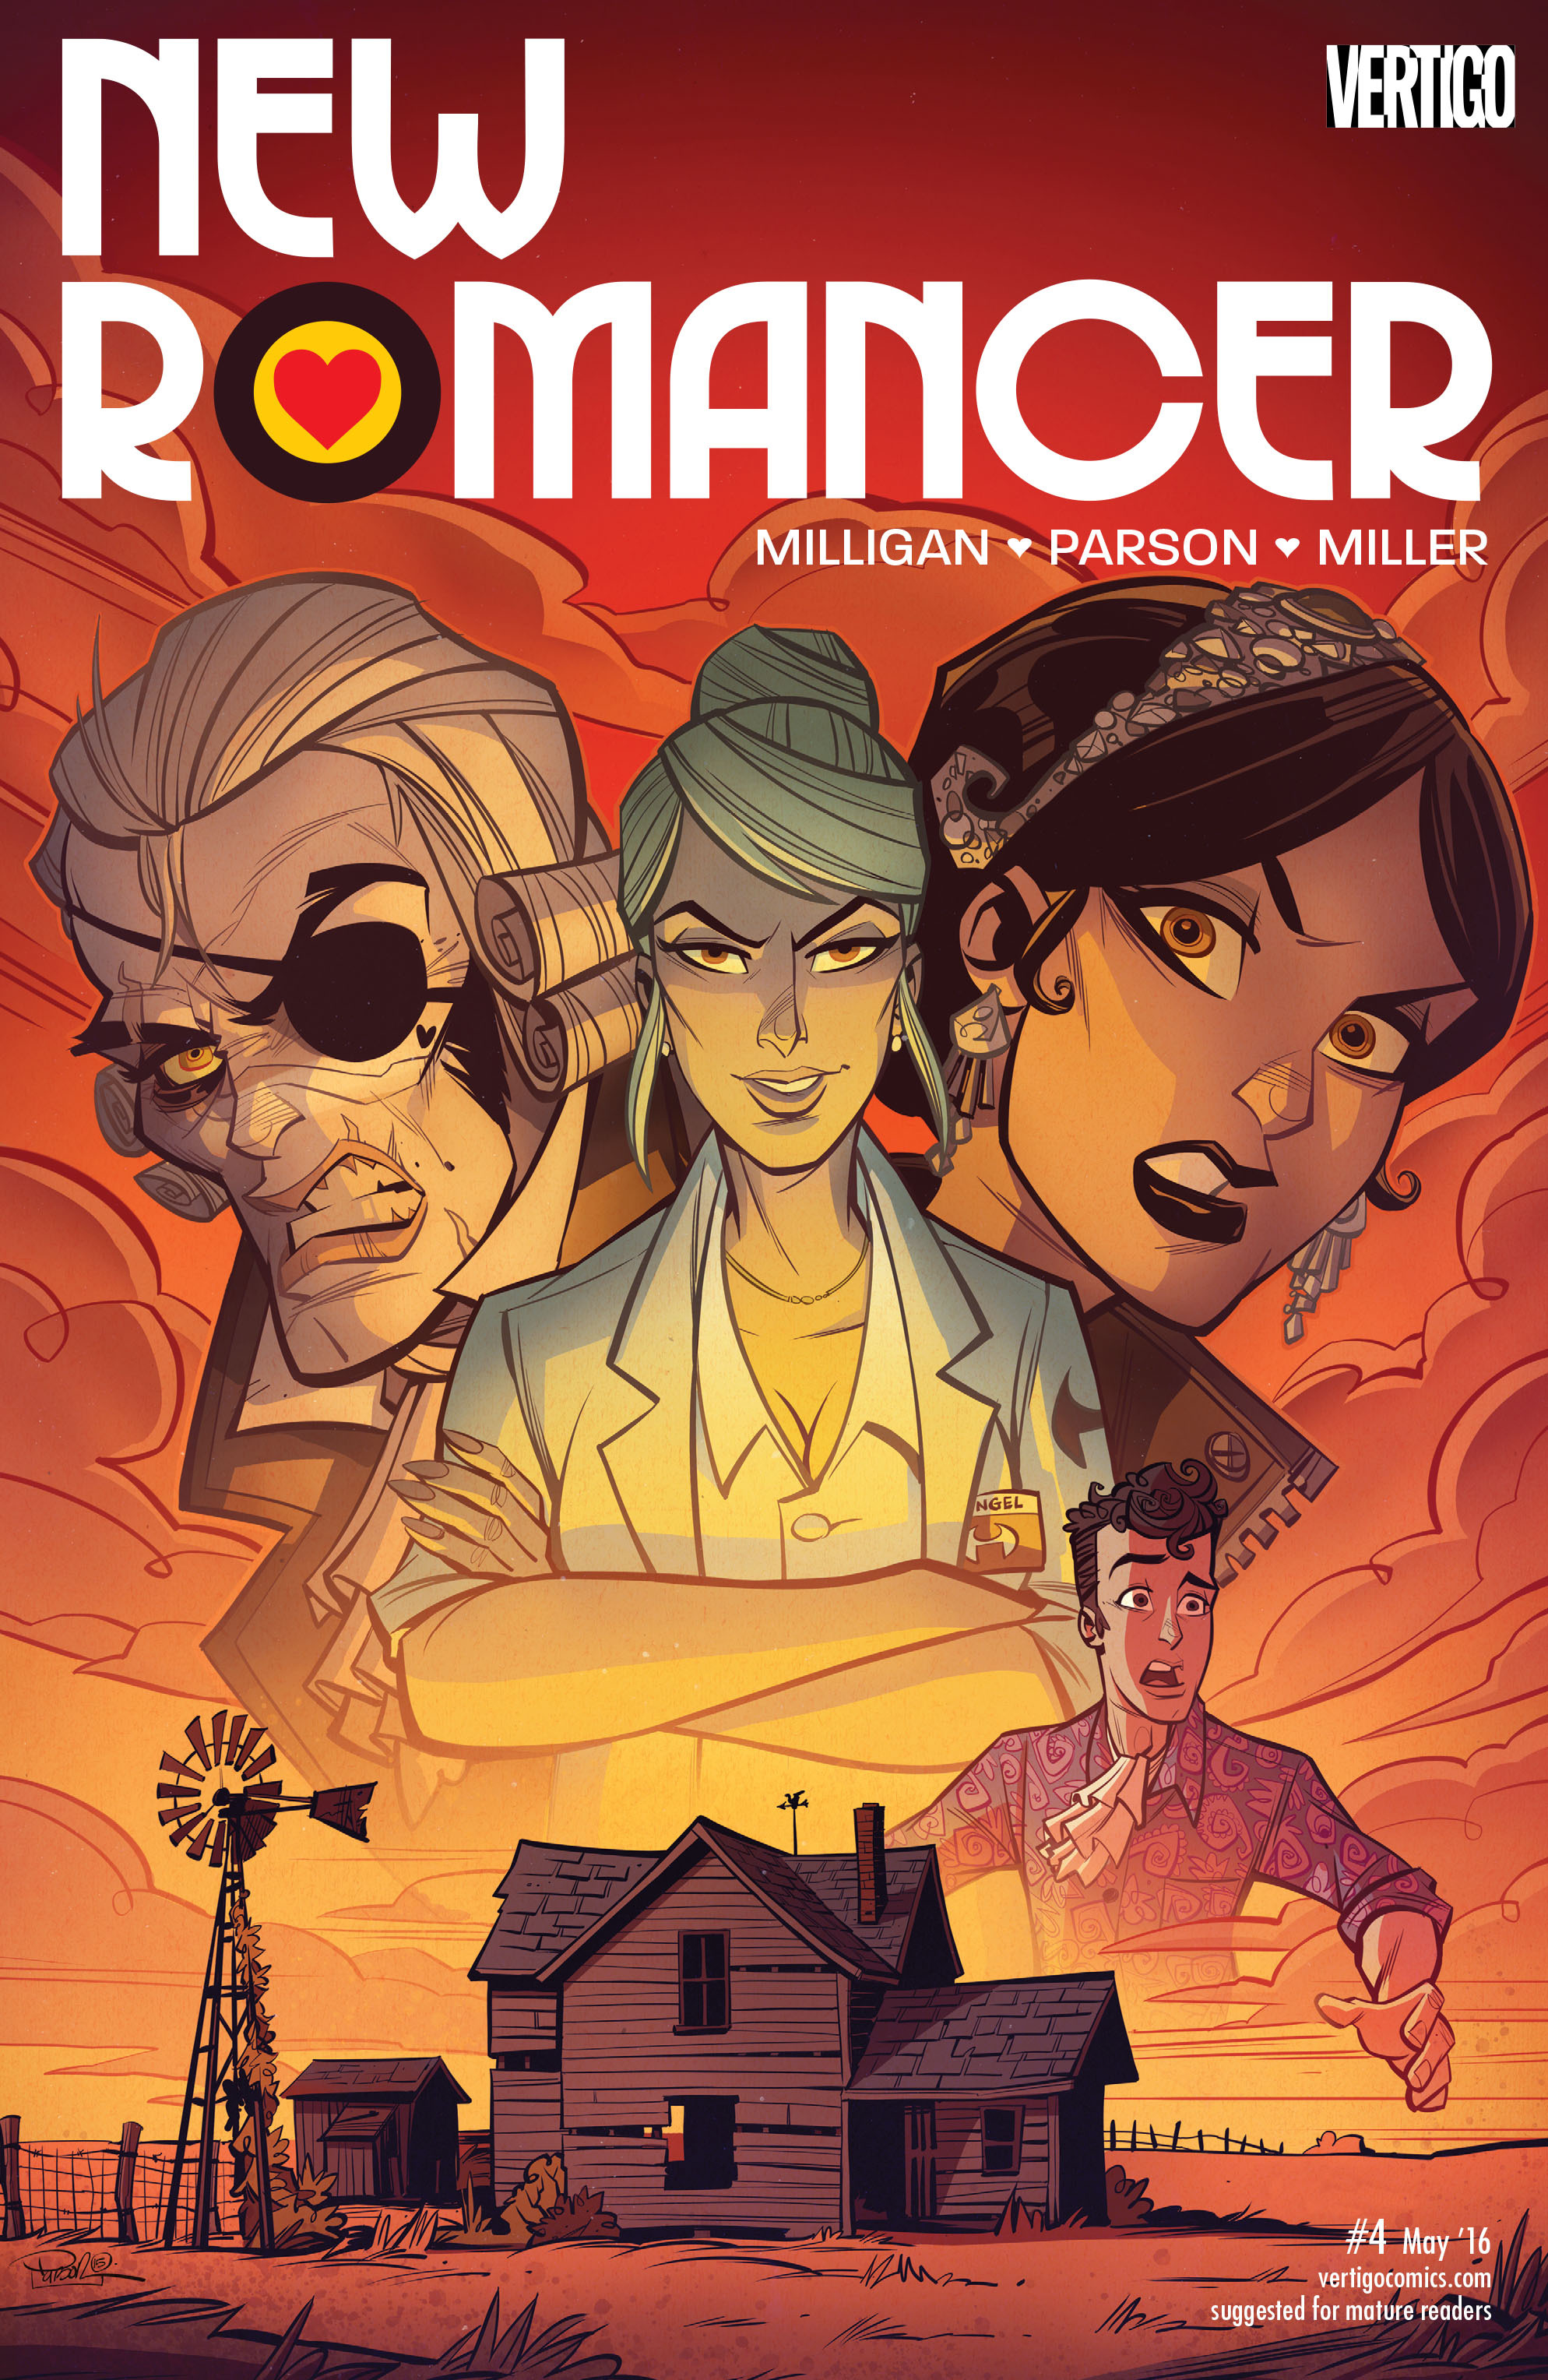 Read online New Romancer comic -  Issue #4 - 1